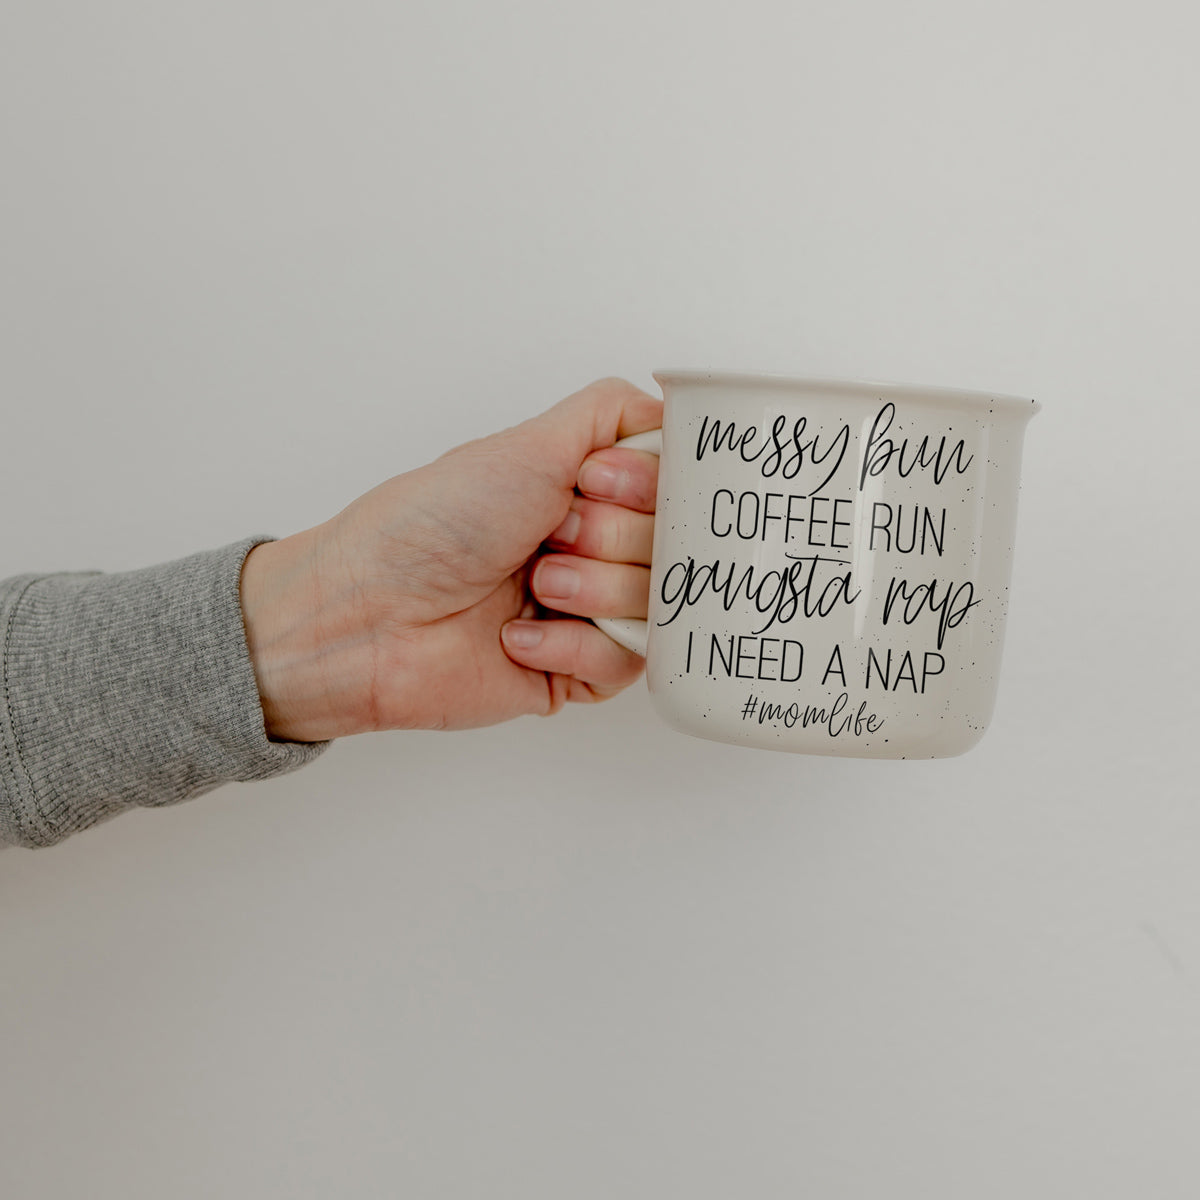 Funny coffee mugs for your mom that are stylish